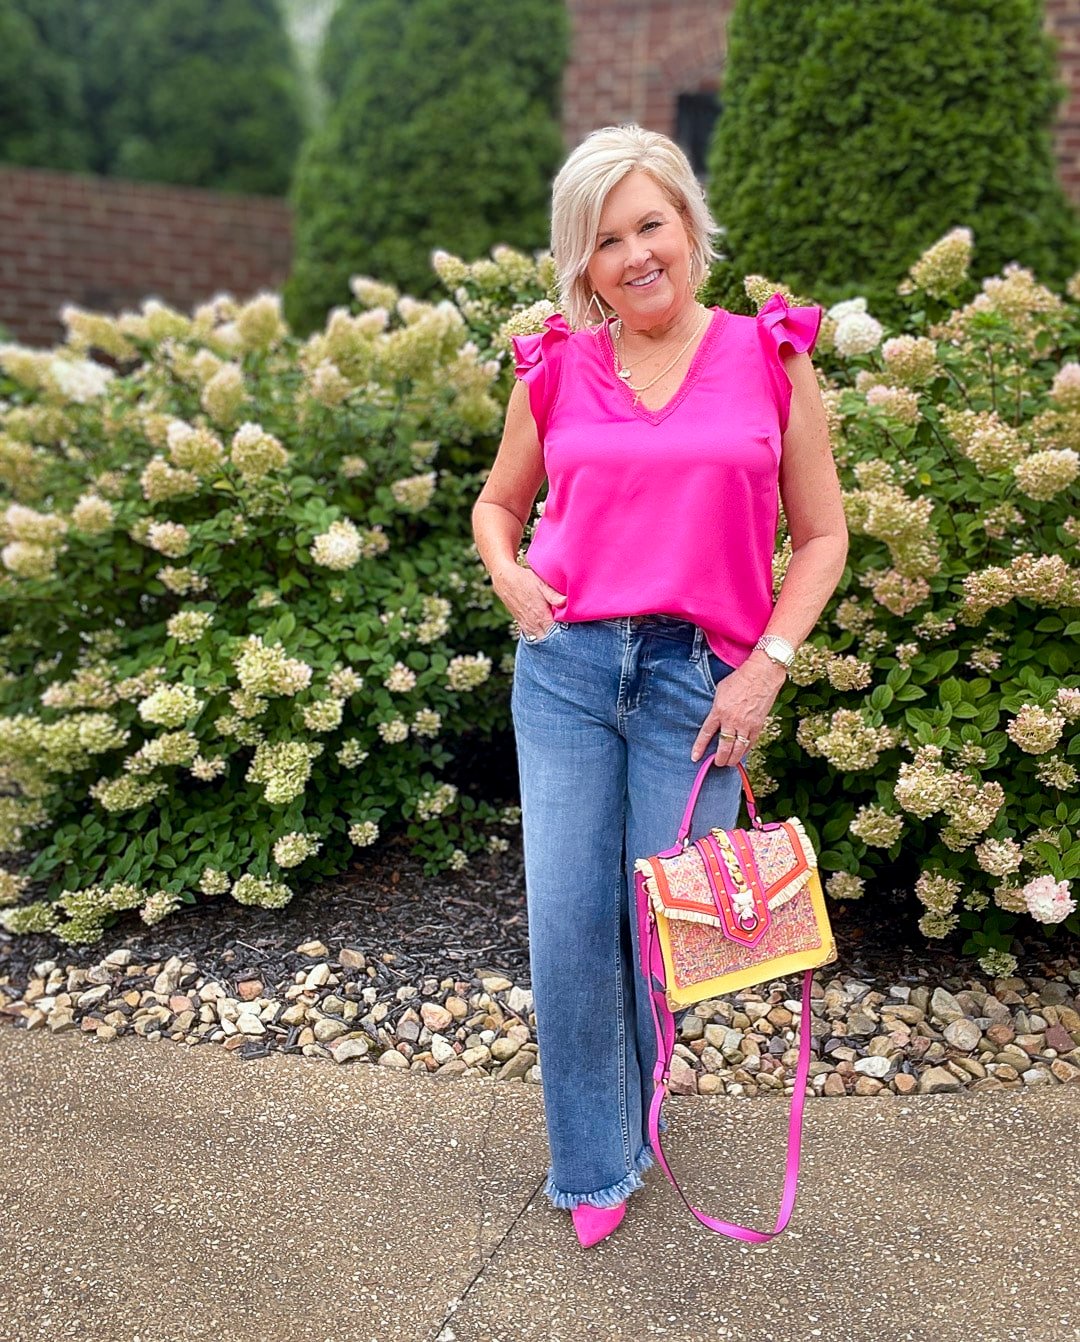 Over 40 Fashion Blogger, Tania Stephens is styling wide leg jeans with a pink ruffled top19